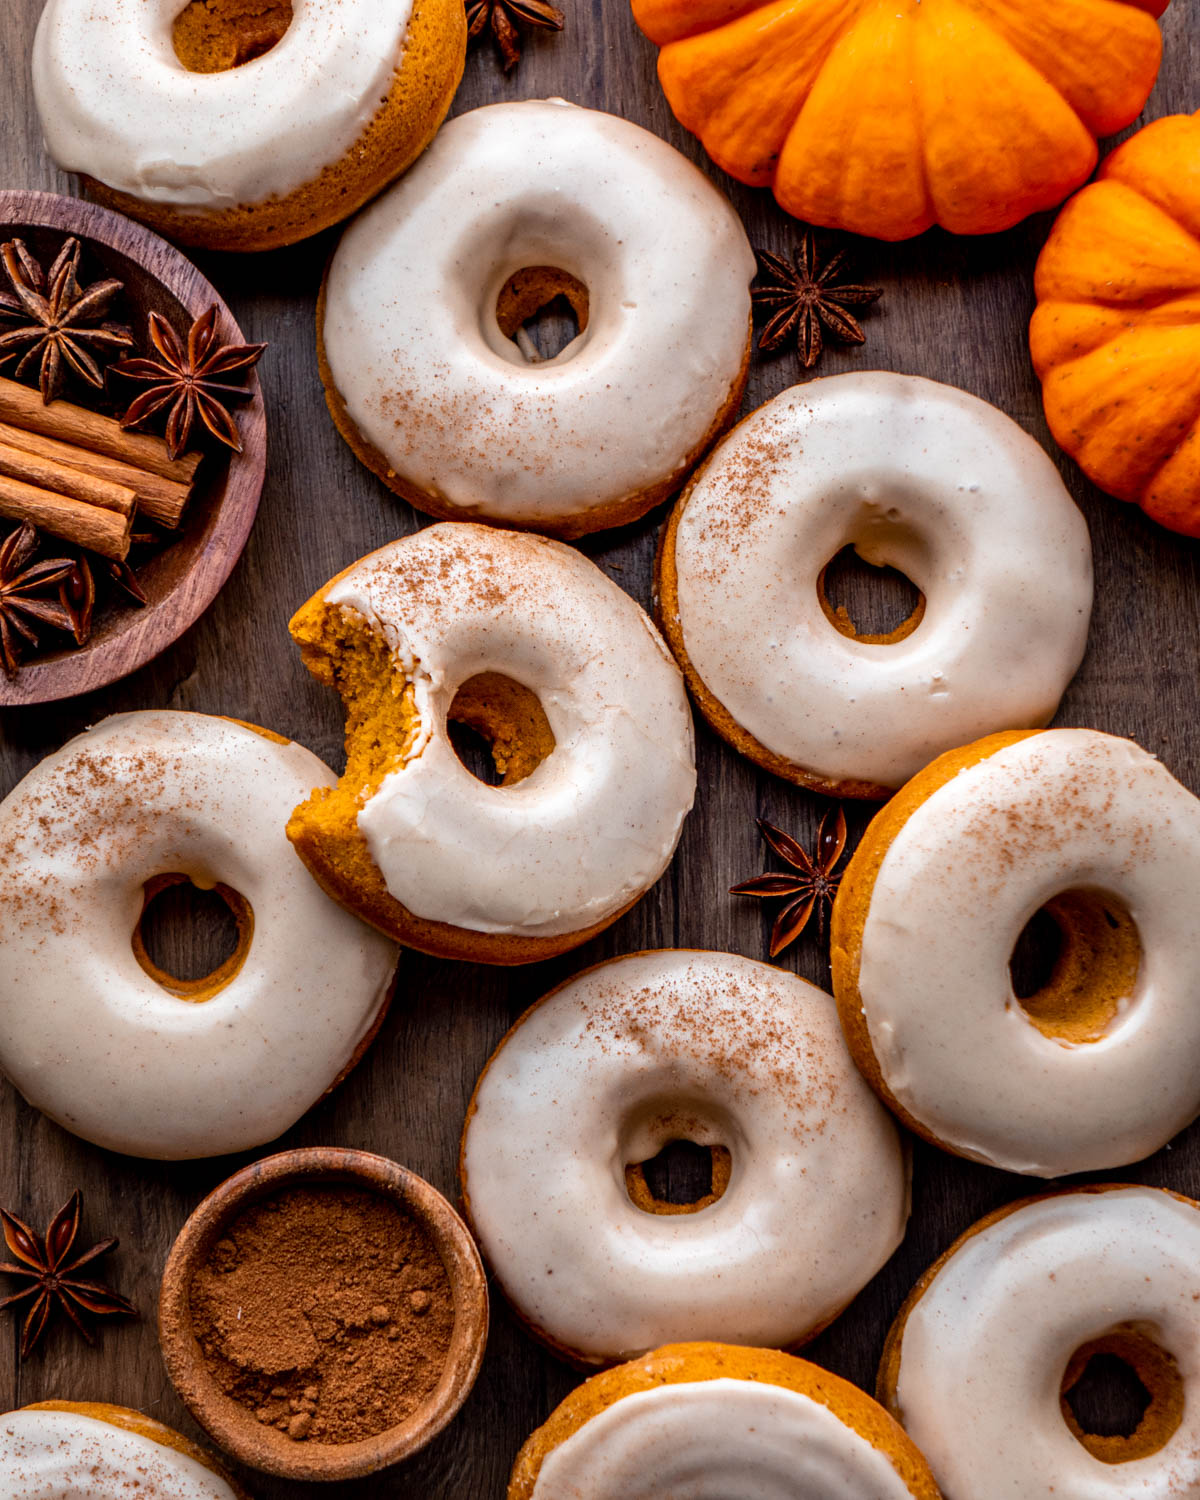 pumpkin donuts with a bite taken out on a wood board with pumpkins, cinnamon sticks and star anise around